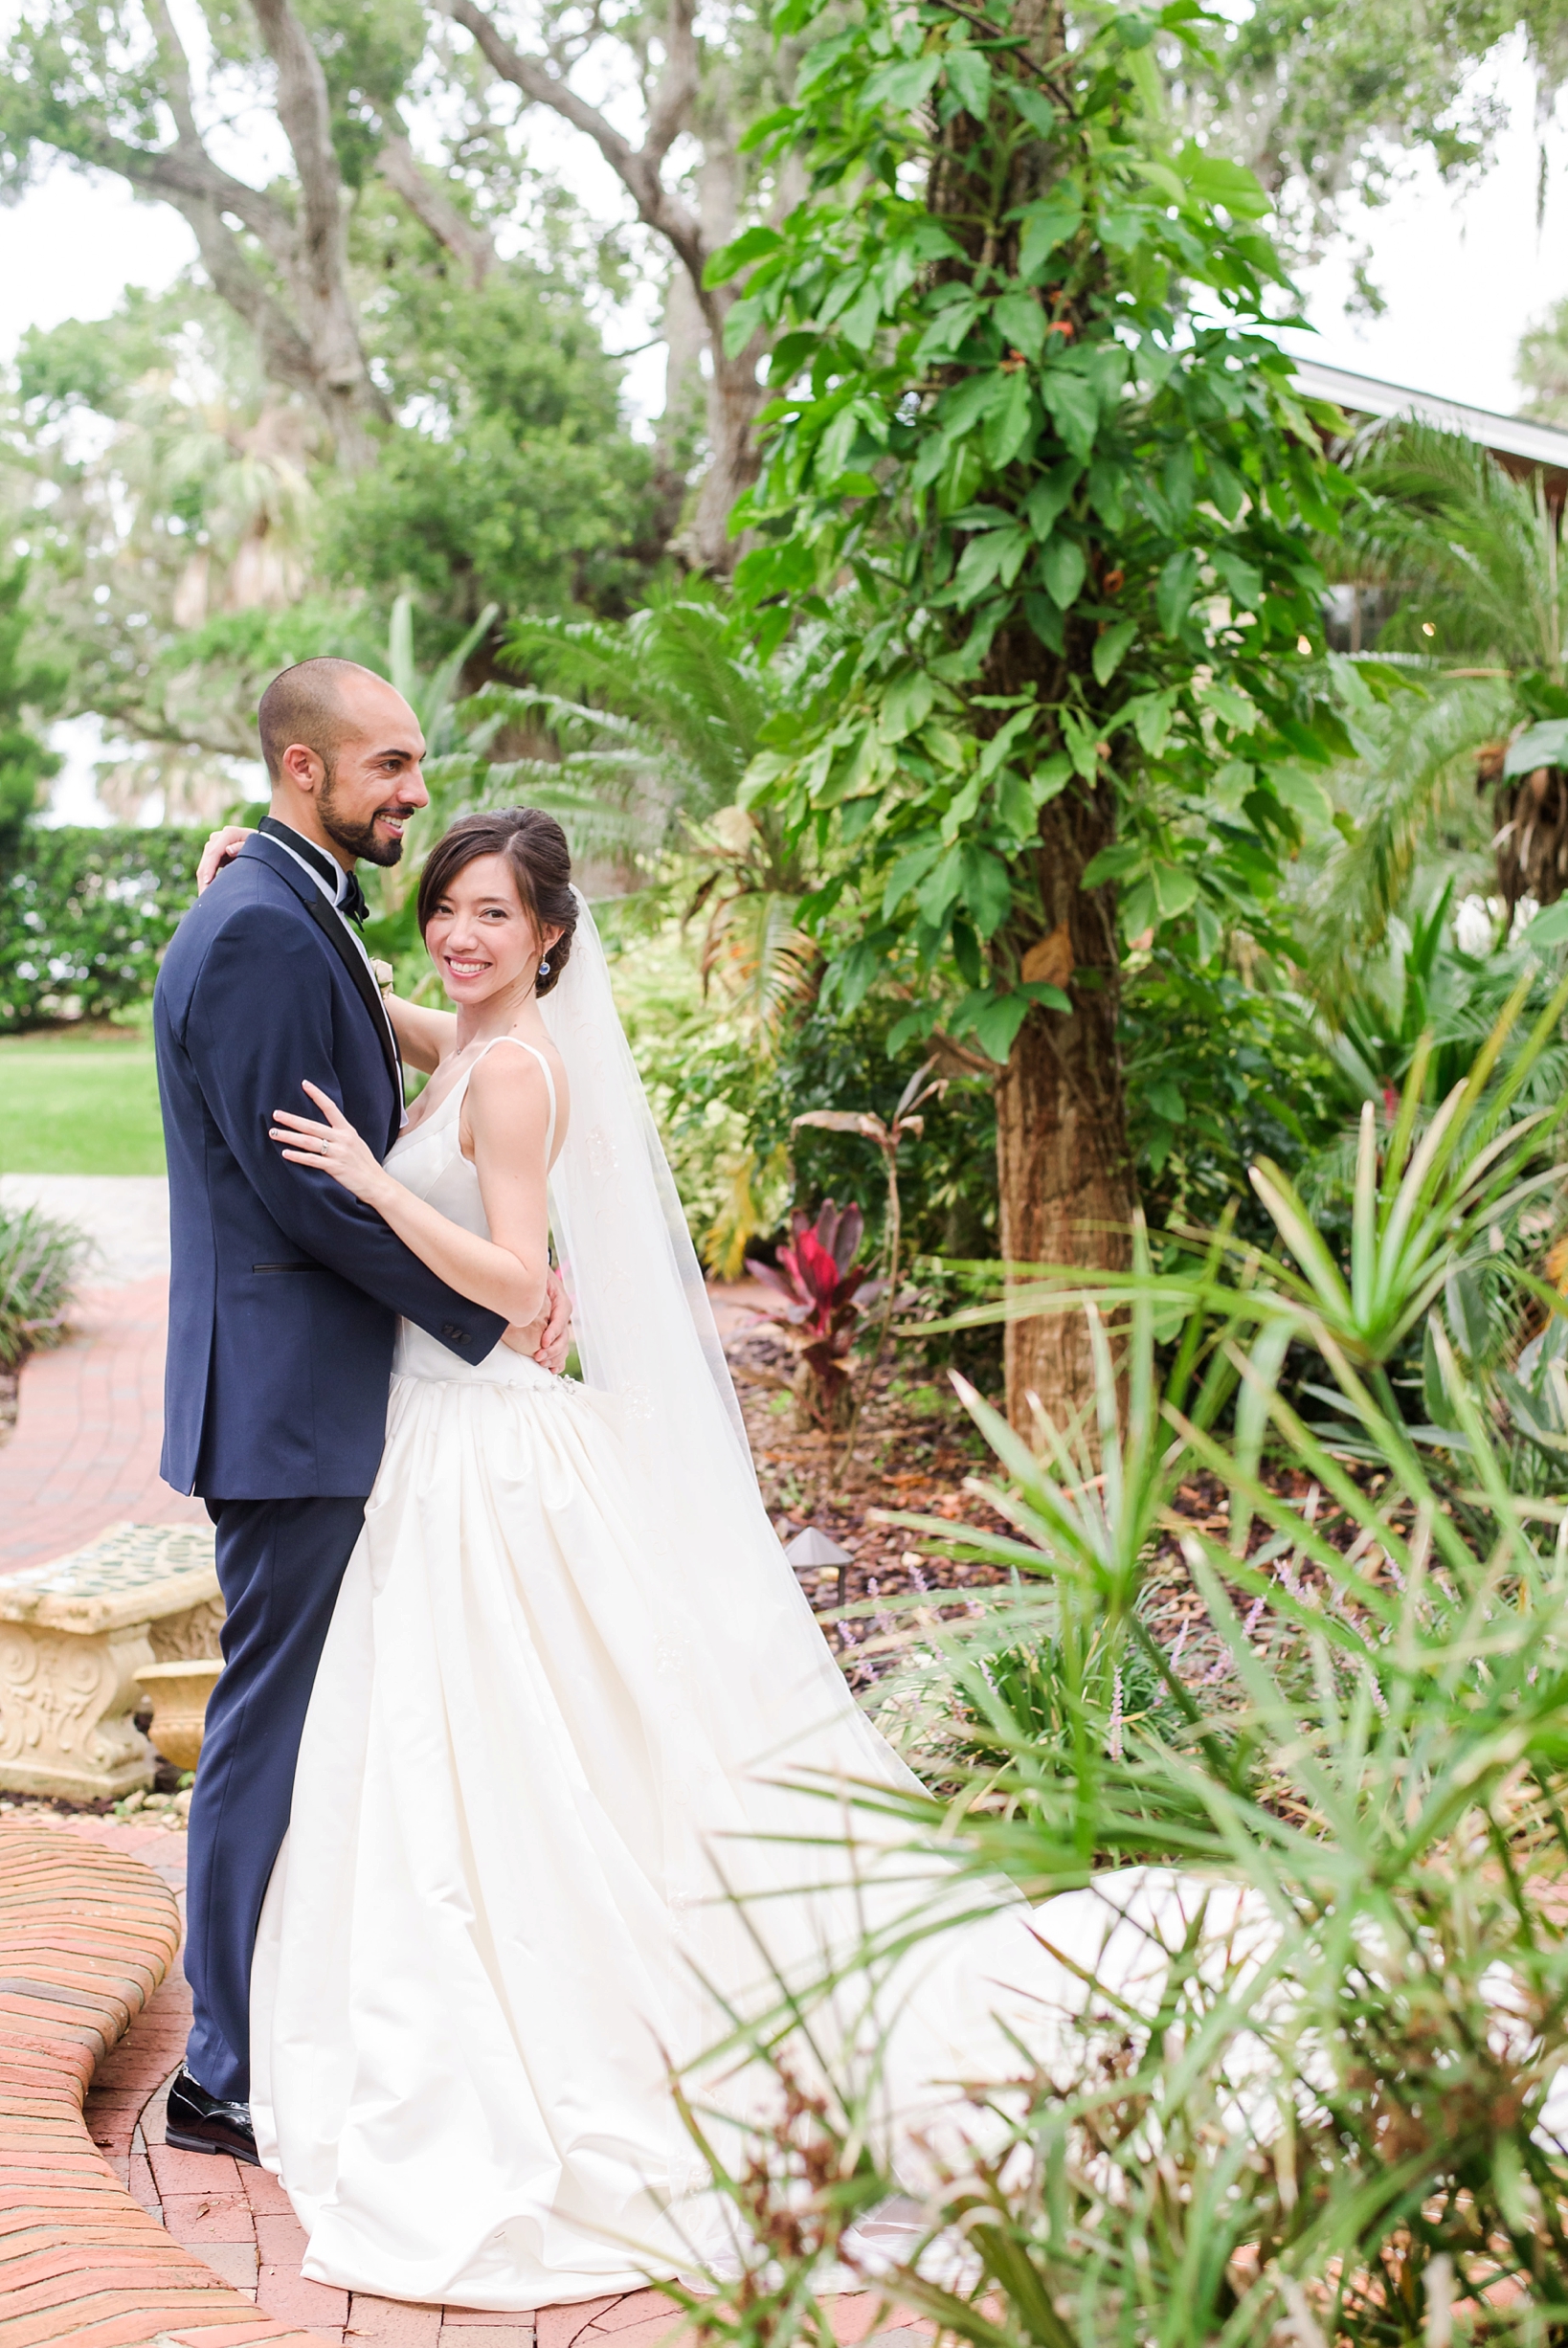 Bridal Portraits of the bride and groom on their wedding day by Sarah & Ben Photography